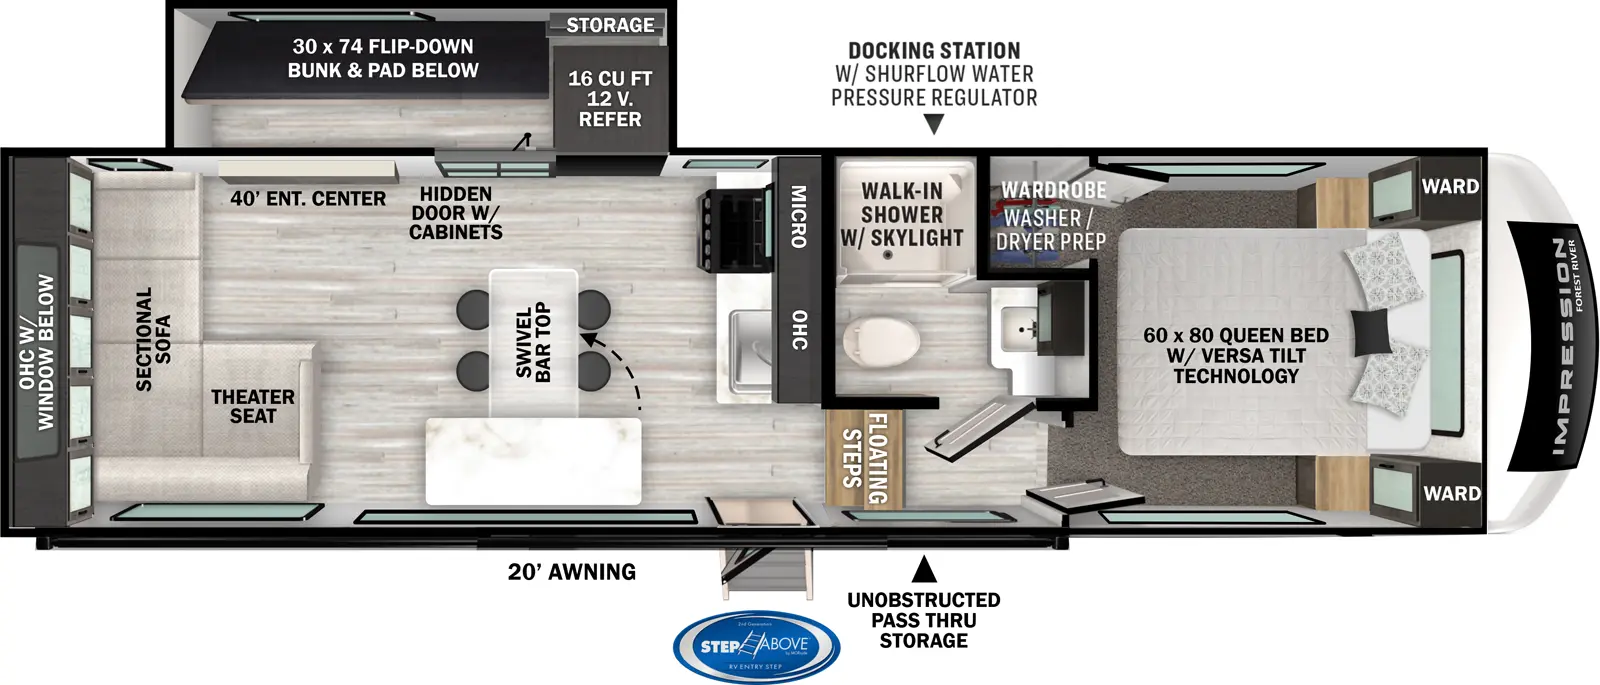 The 238RLVIEW has one slideout and one entry. Exterior features a 20 foot awning, MORryde Step Above entry steps, unobstructed pass-thru storage, and docking station with shurflow water pressure regulator. Interior layout front to back: foot-facing queen bed with versa tilt, wardrobes on each side, and off-door side closet with washer/dryer prep; off-door side full bathroom with walk-in shower with skylight; floating steps down to main living area and entry; kitchen counter with sink, overhead cabinet, microwave and cooktop along inner wall; off-door side slideout with 12V refrigerator, hidden door with cabinets with flip down bunk, pad below and storage behind, and entertainment center; door side swivel bar top with stools; rear theater seat with sectional sofa and overhead cabinet with window below.